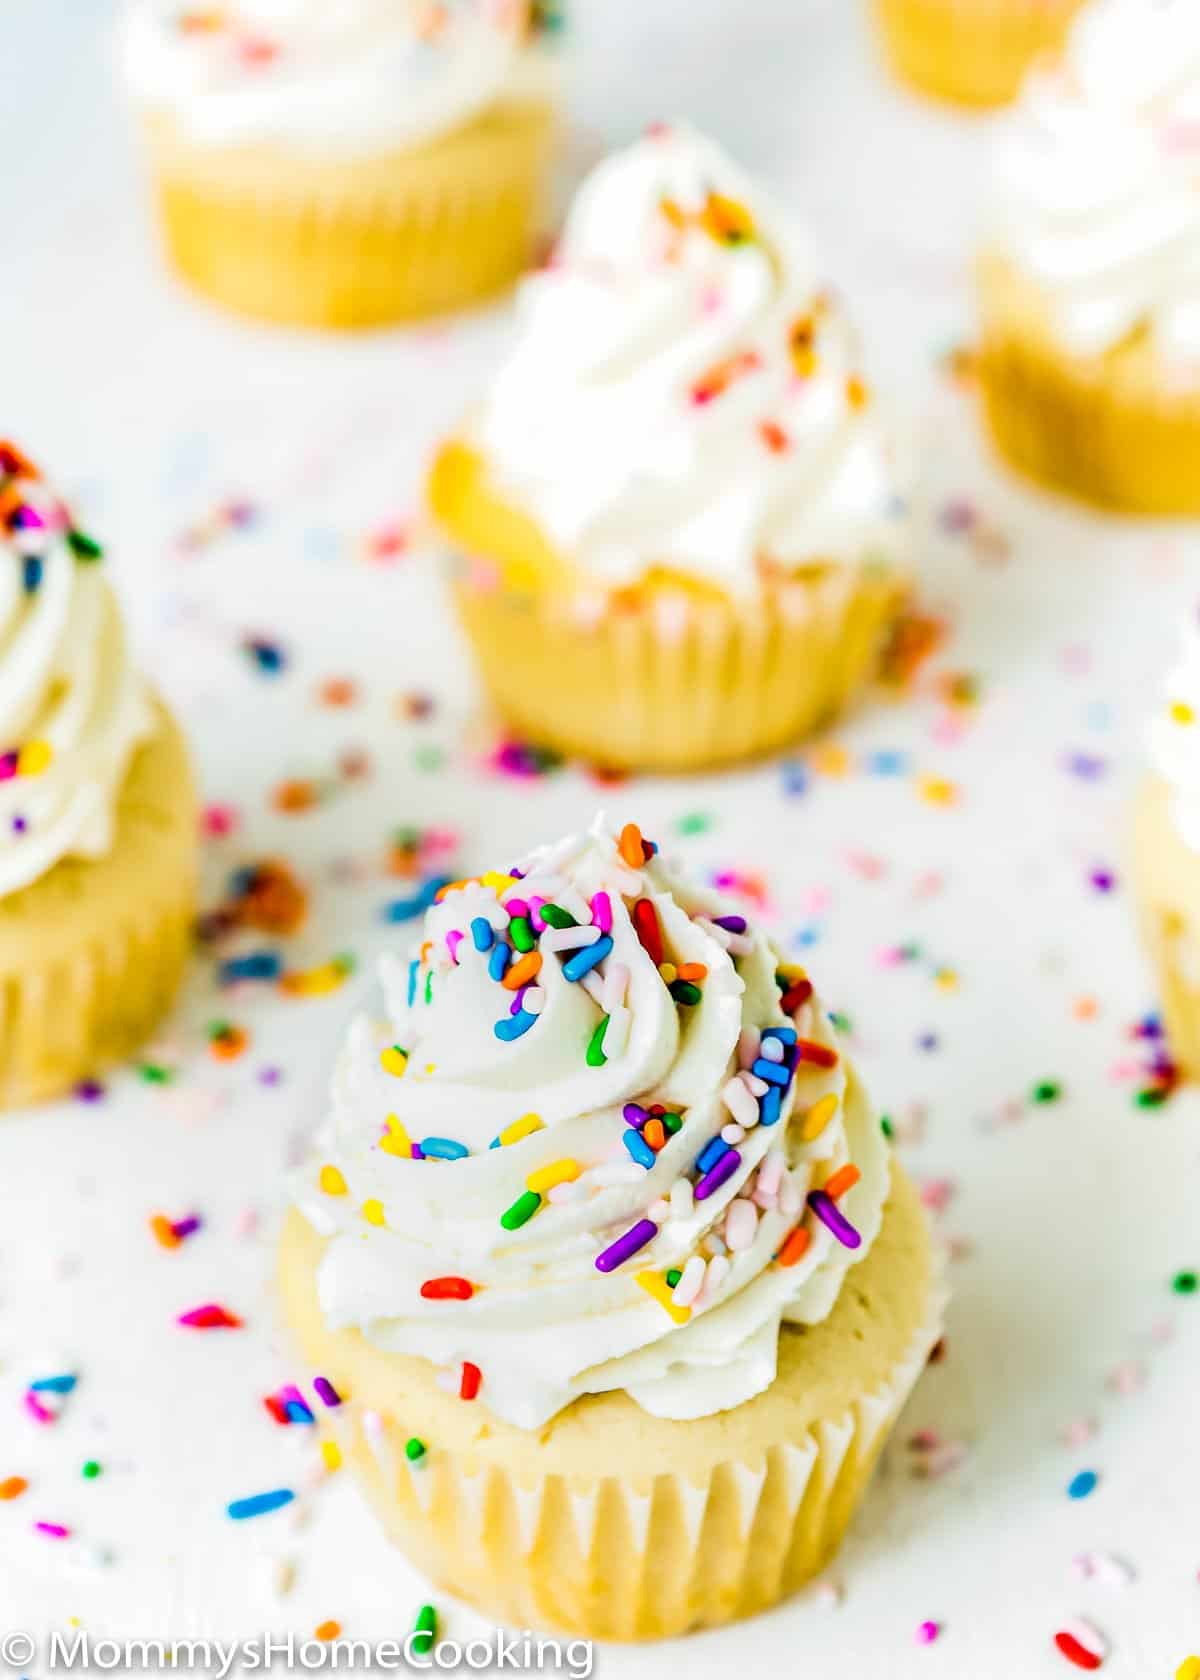 egg-free vanilla cupcakes with frosting and sprinkles over a white surface.